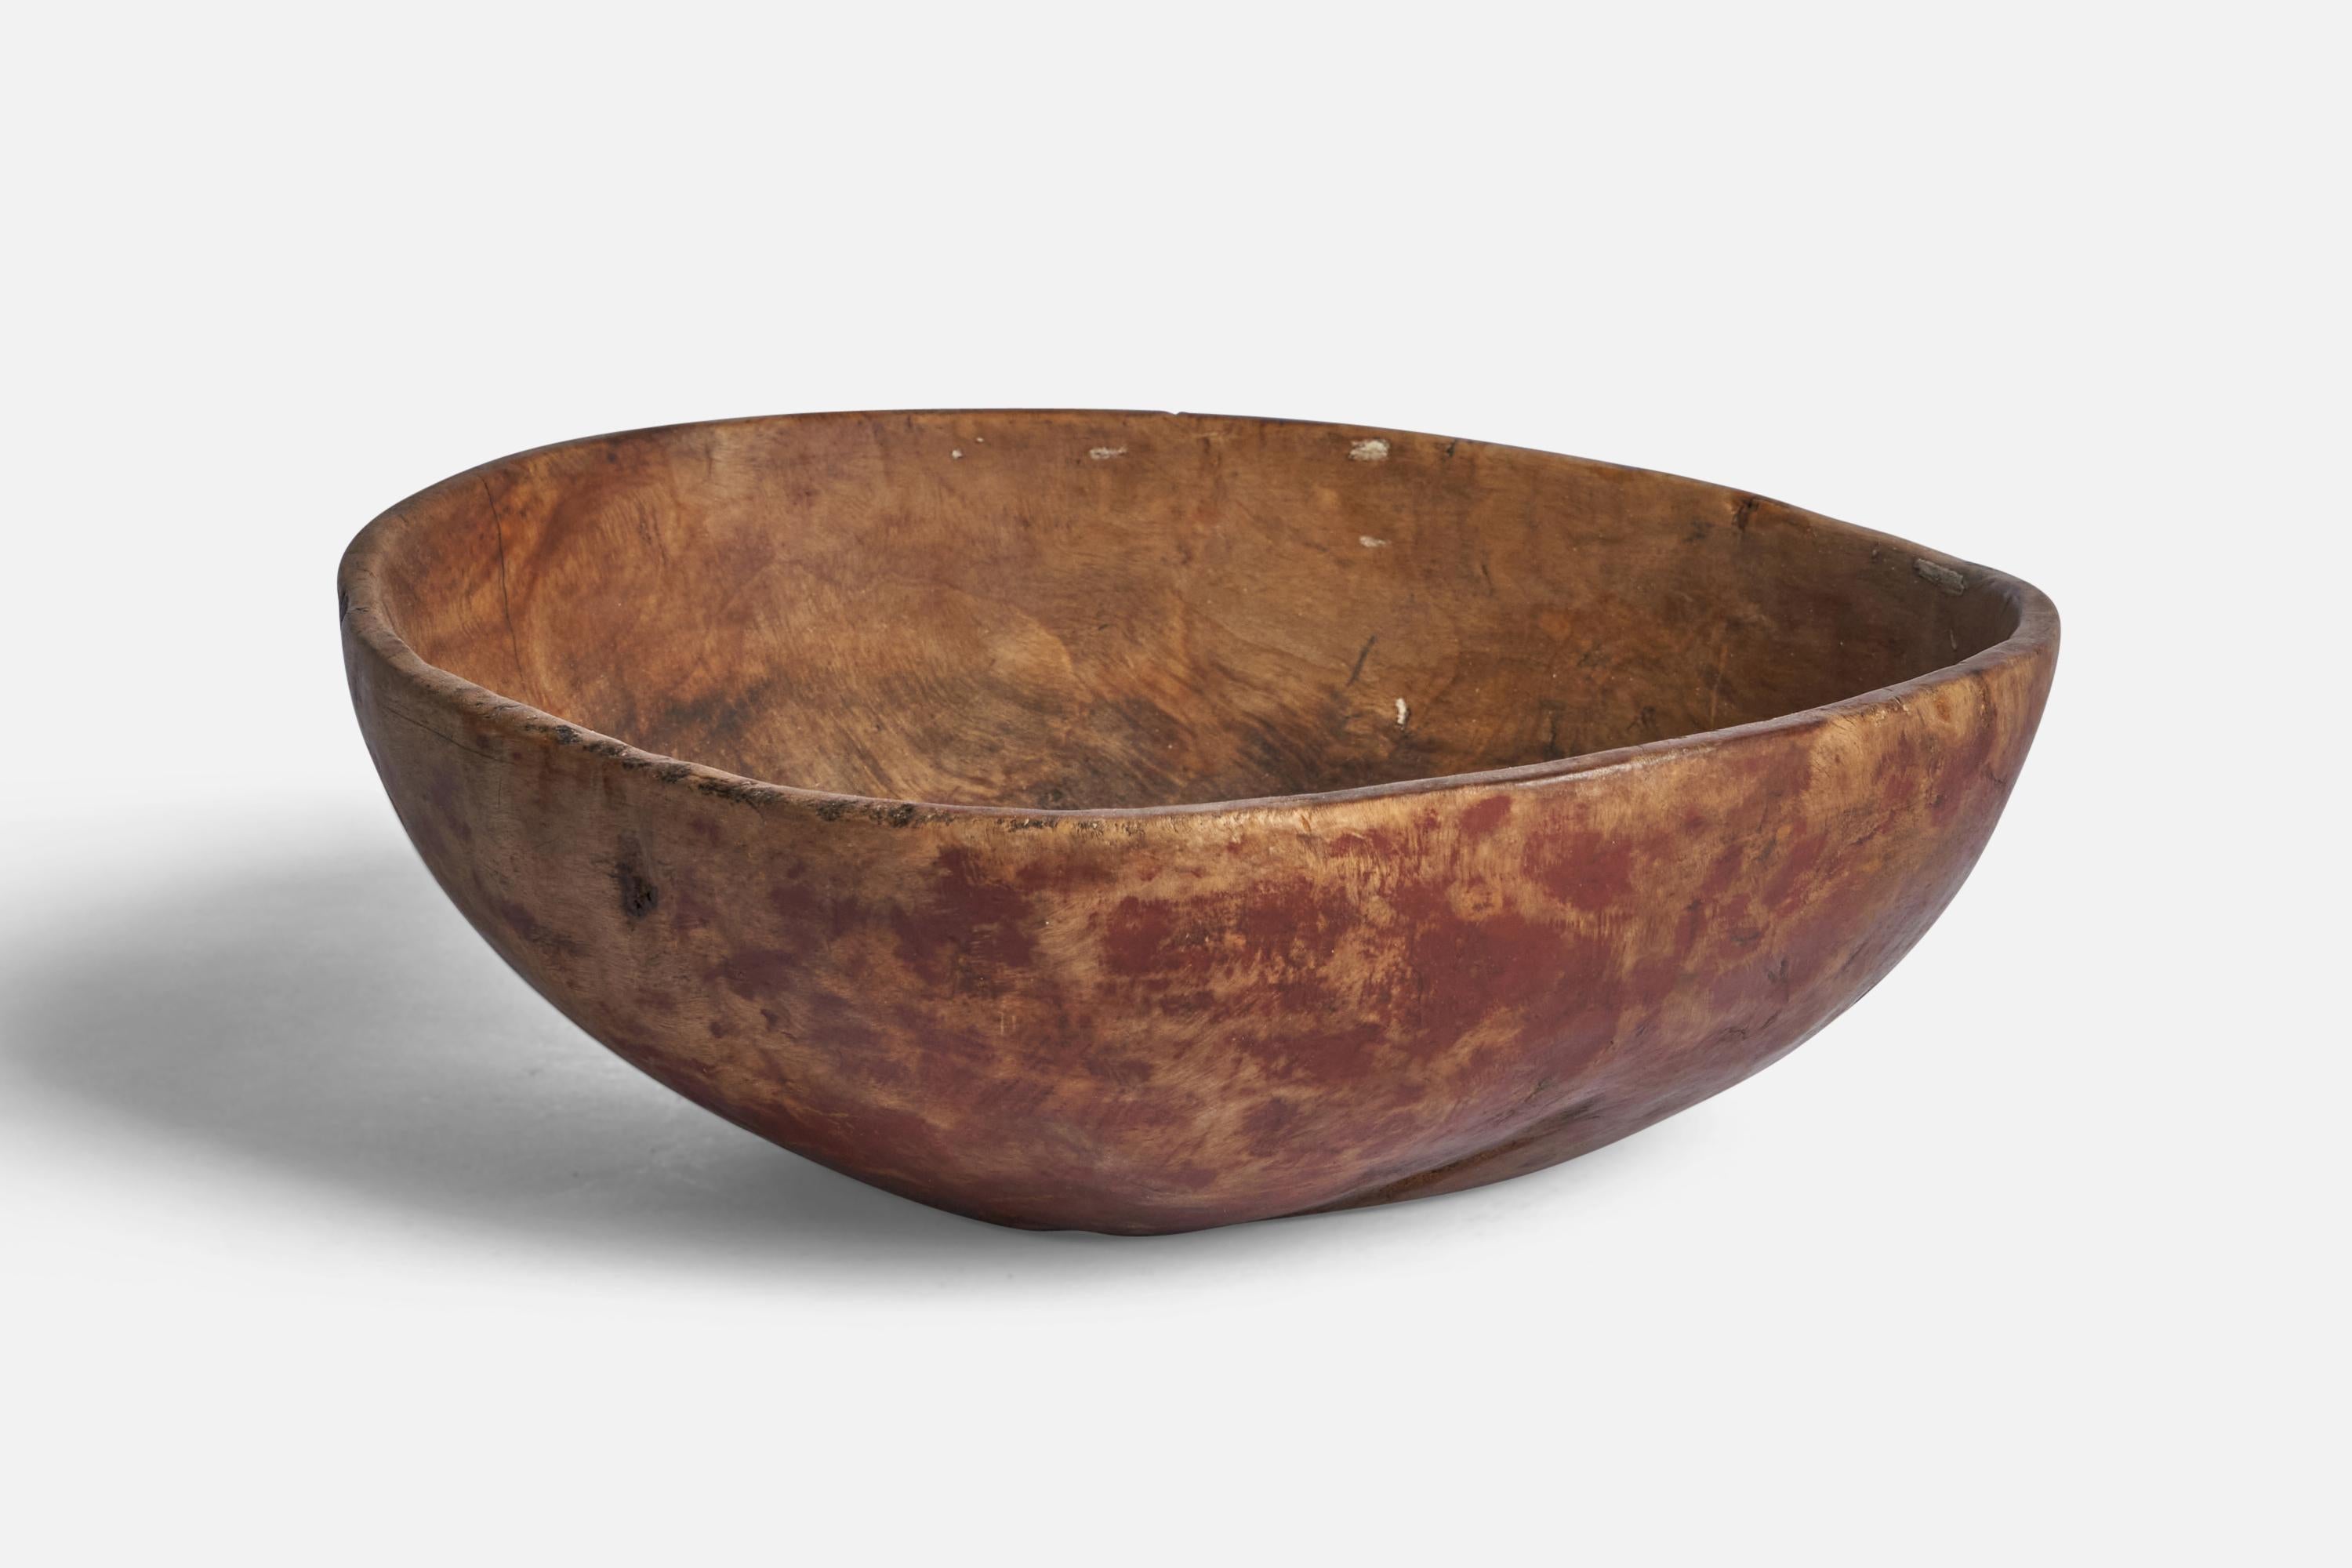 A red-painted wood bowl designed and produced in Sweden, 19th century.